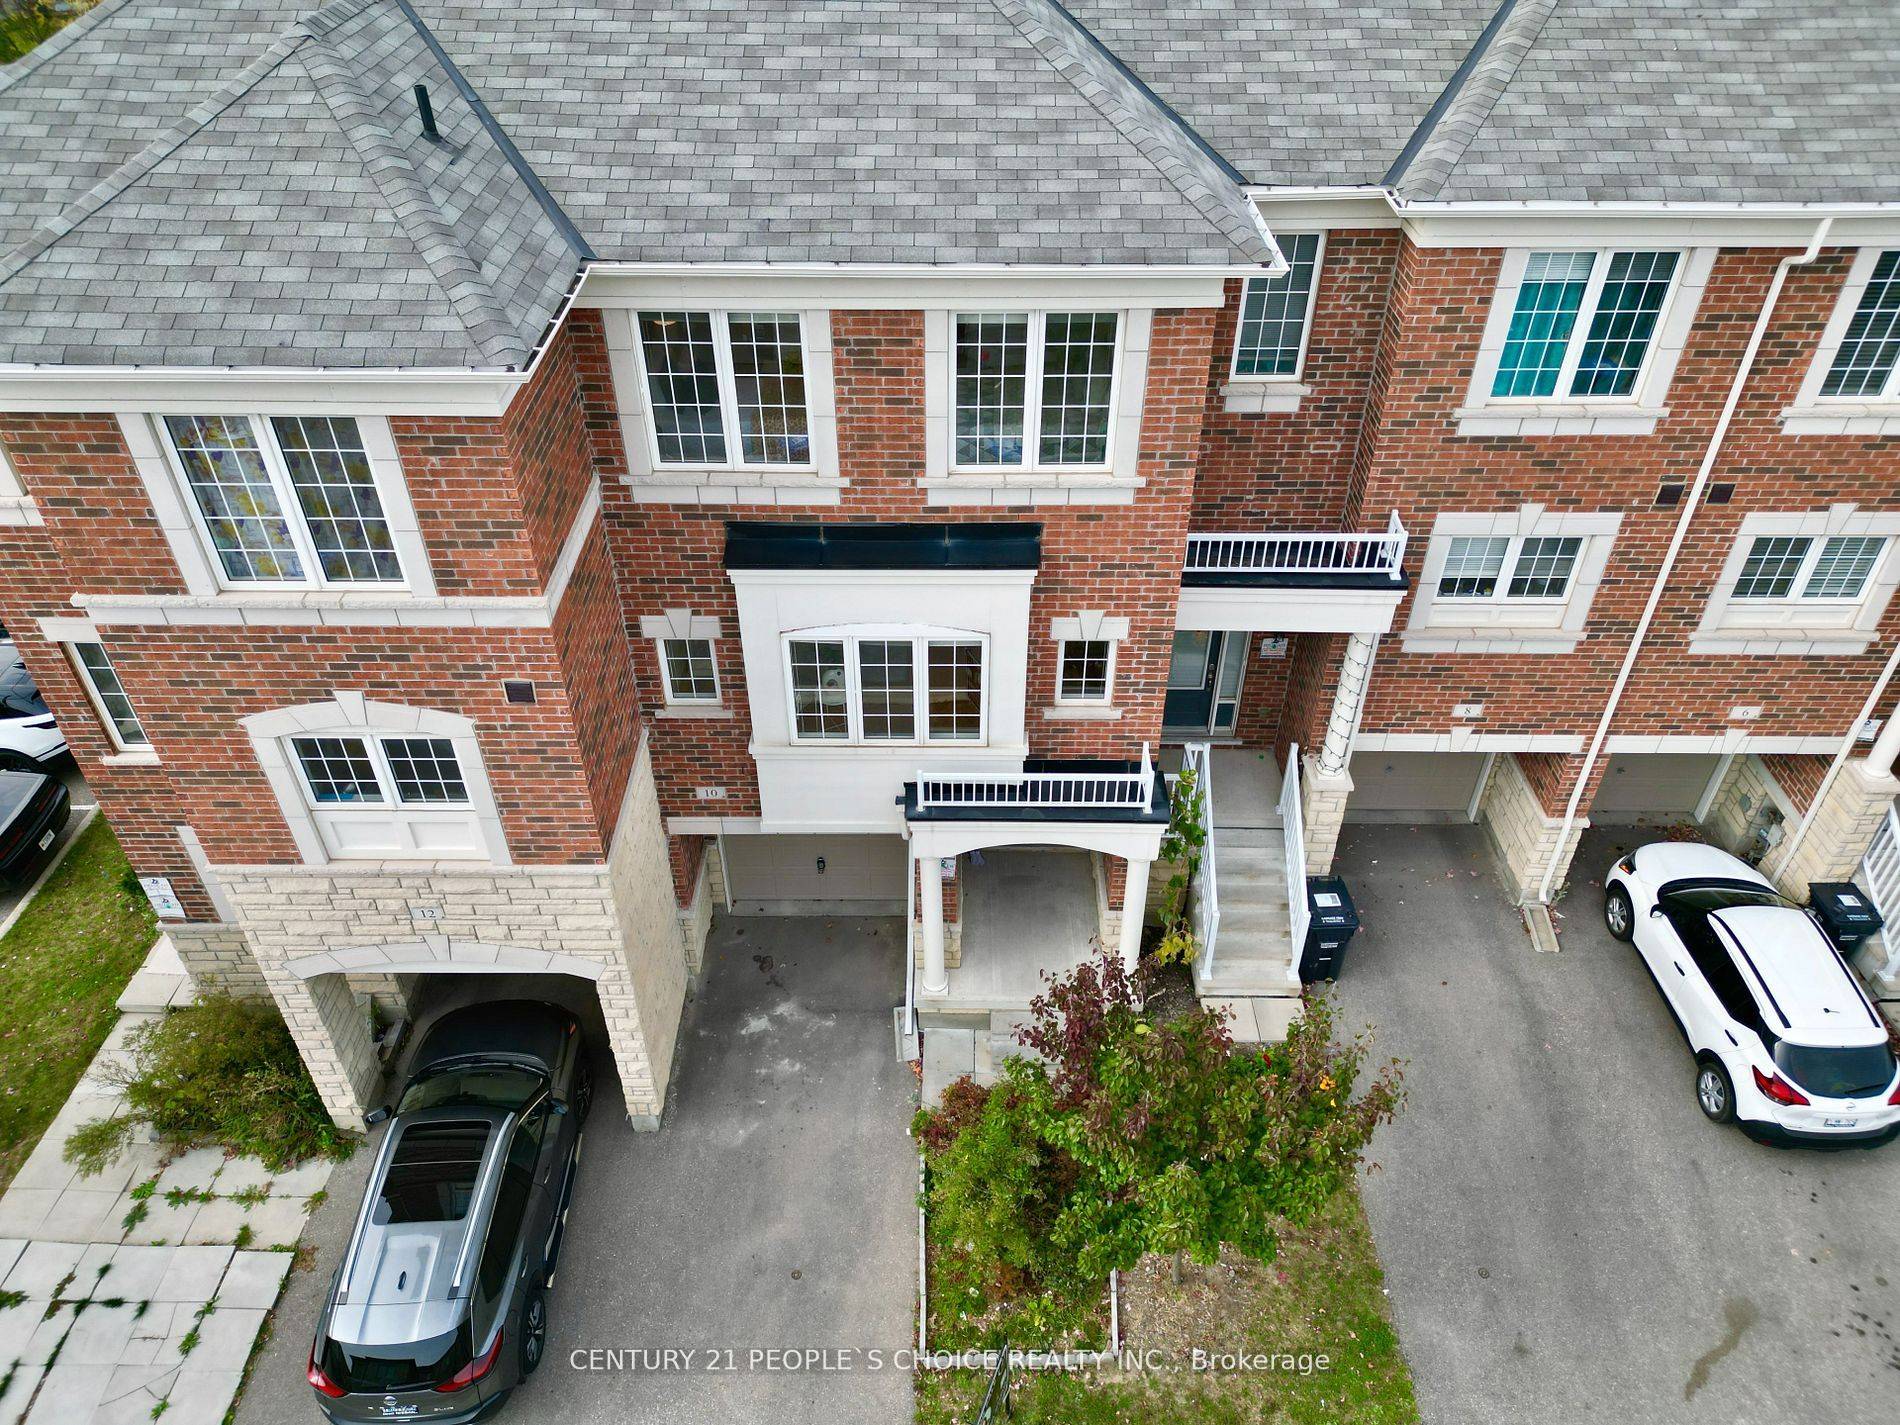 2016 Built 1st Occupancy in 2017, Approx 1800 Sqft, 3 Storey TH W Bsmt, Offers Versatility, Privacy Ample Room For A Growing Family Or Those Seeking Extra Space, Both For ...